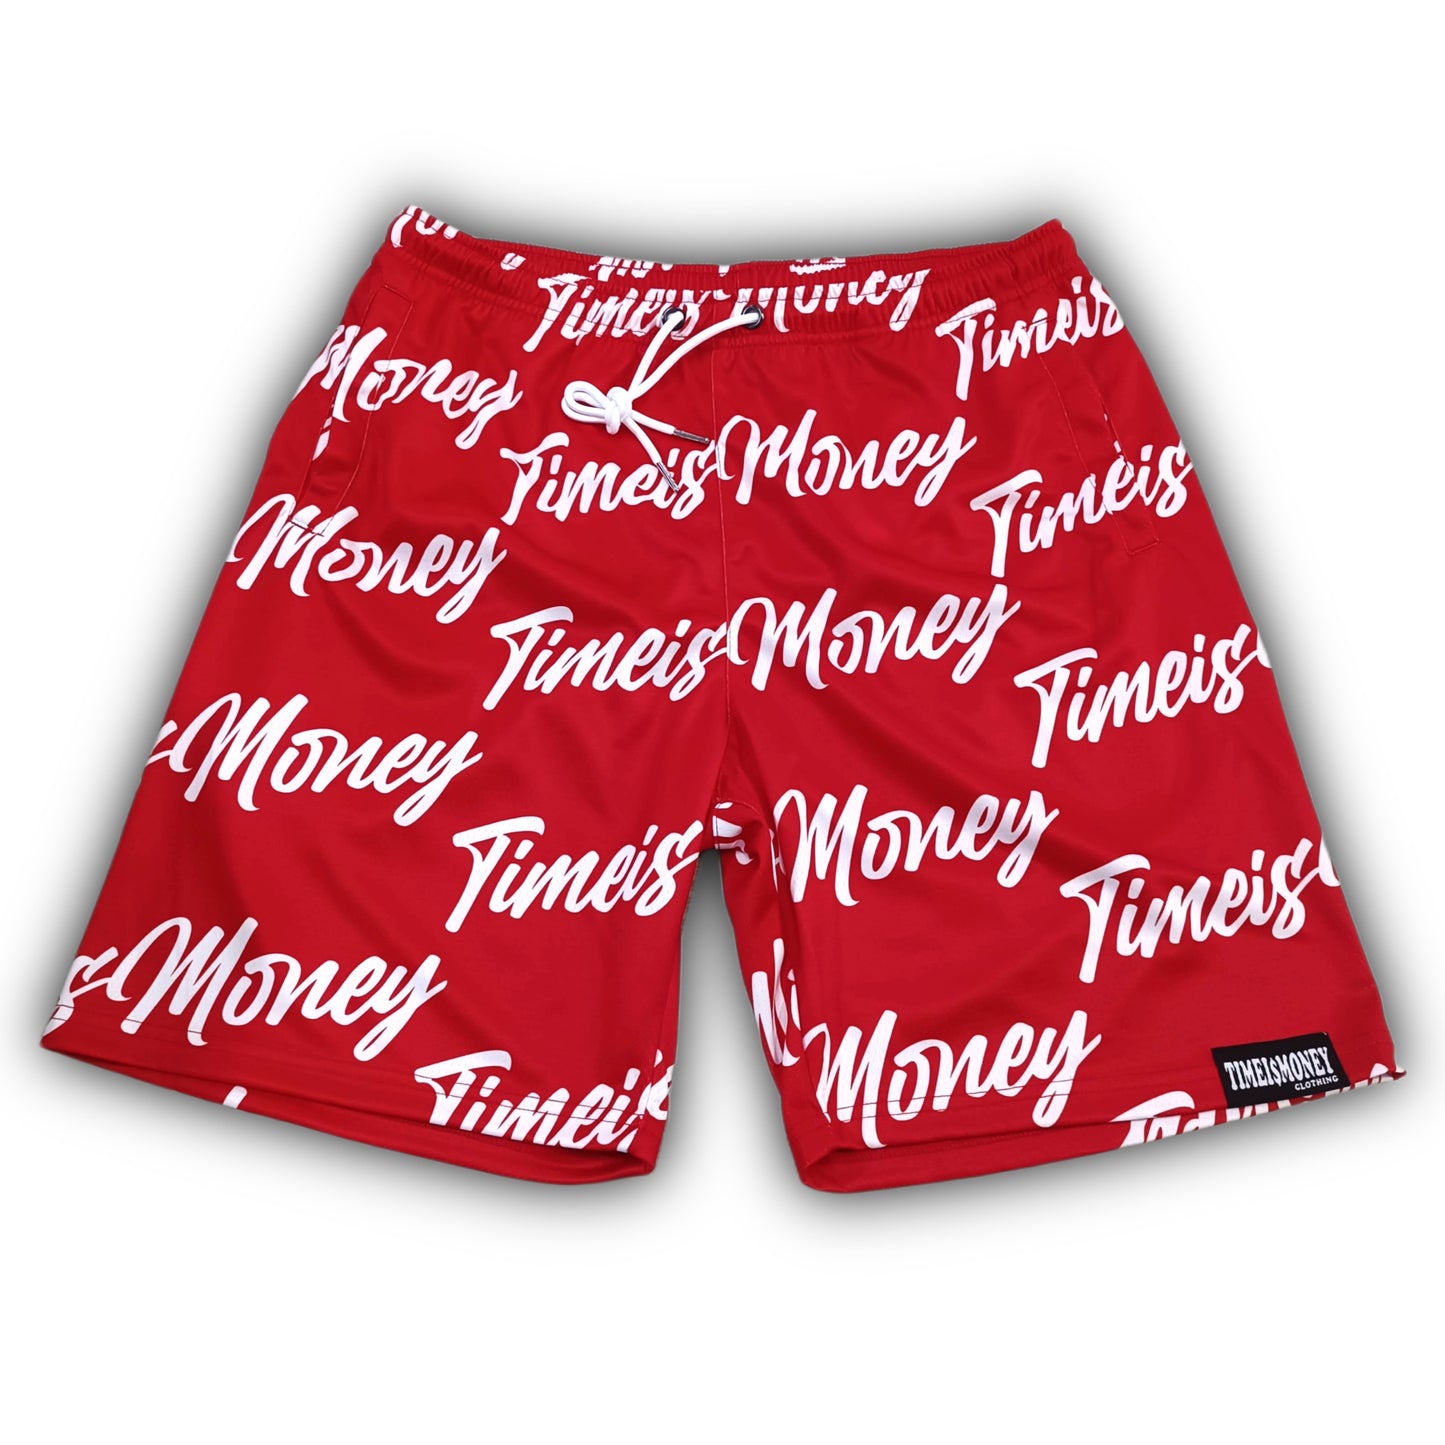 TIMEI$MONEY RED MESH SHORTS